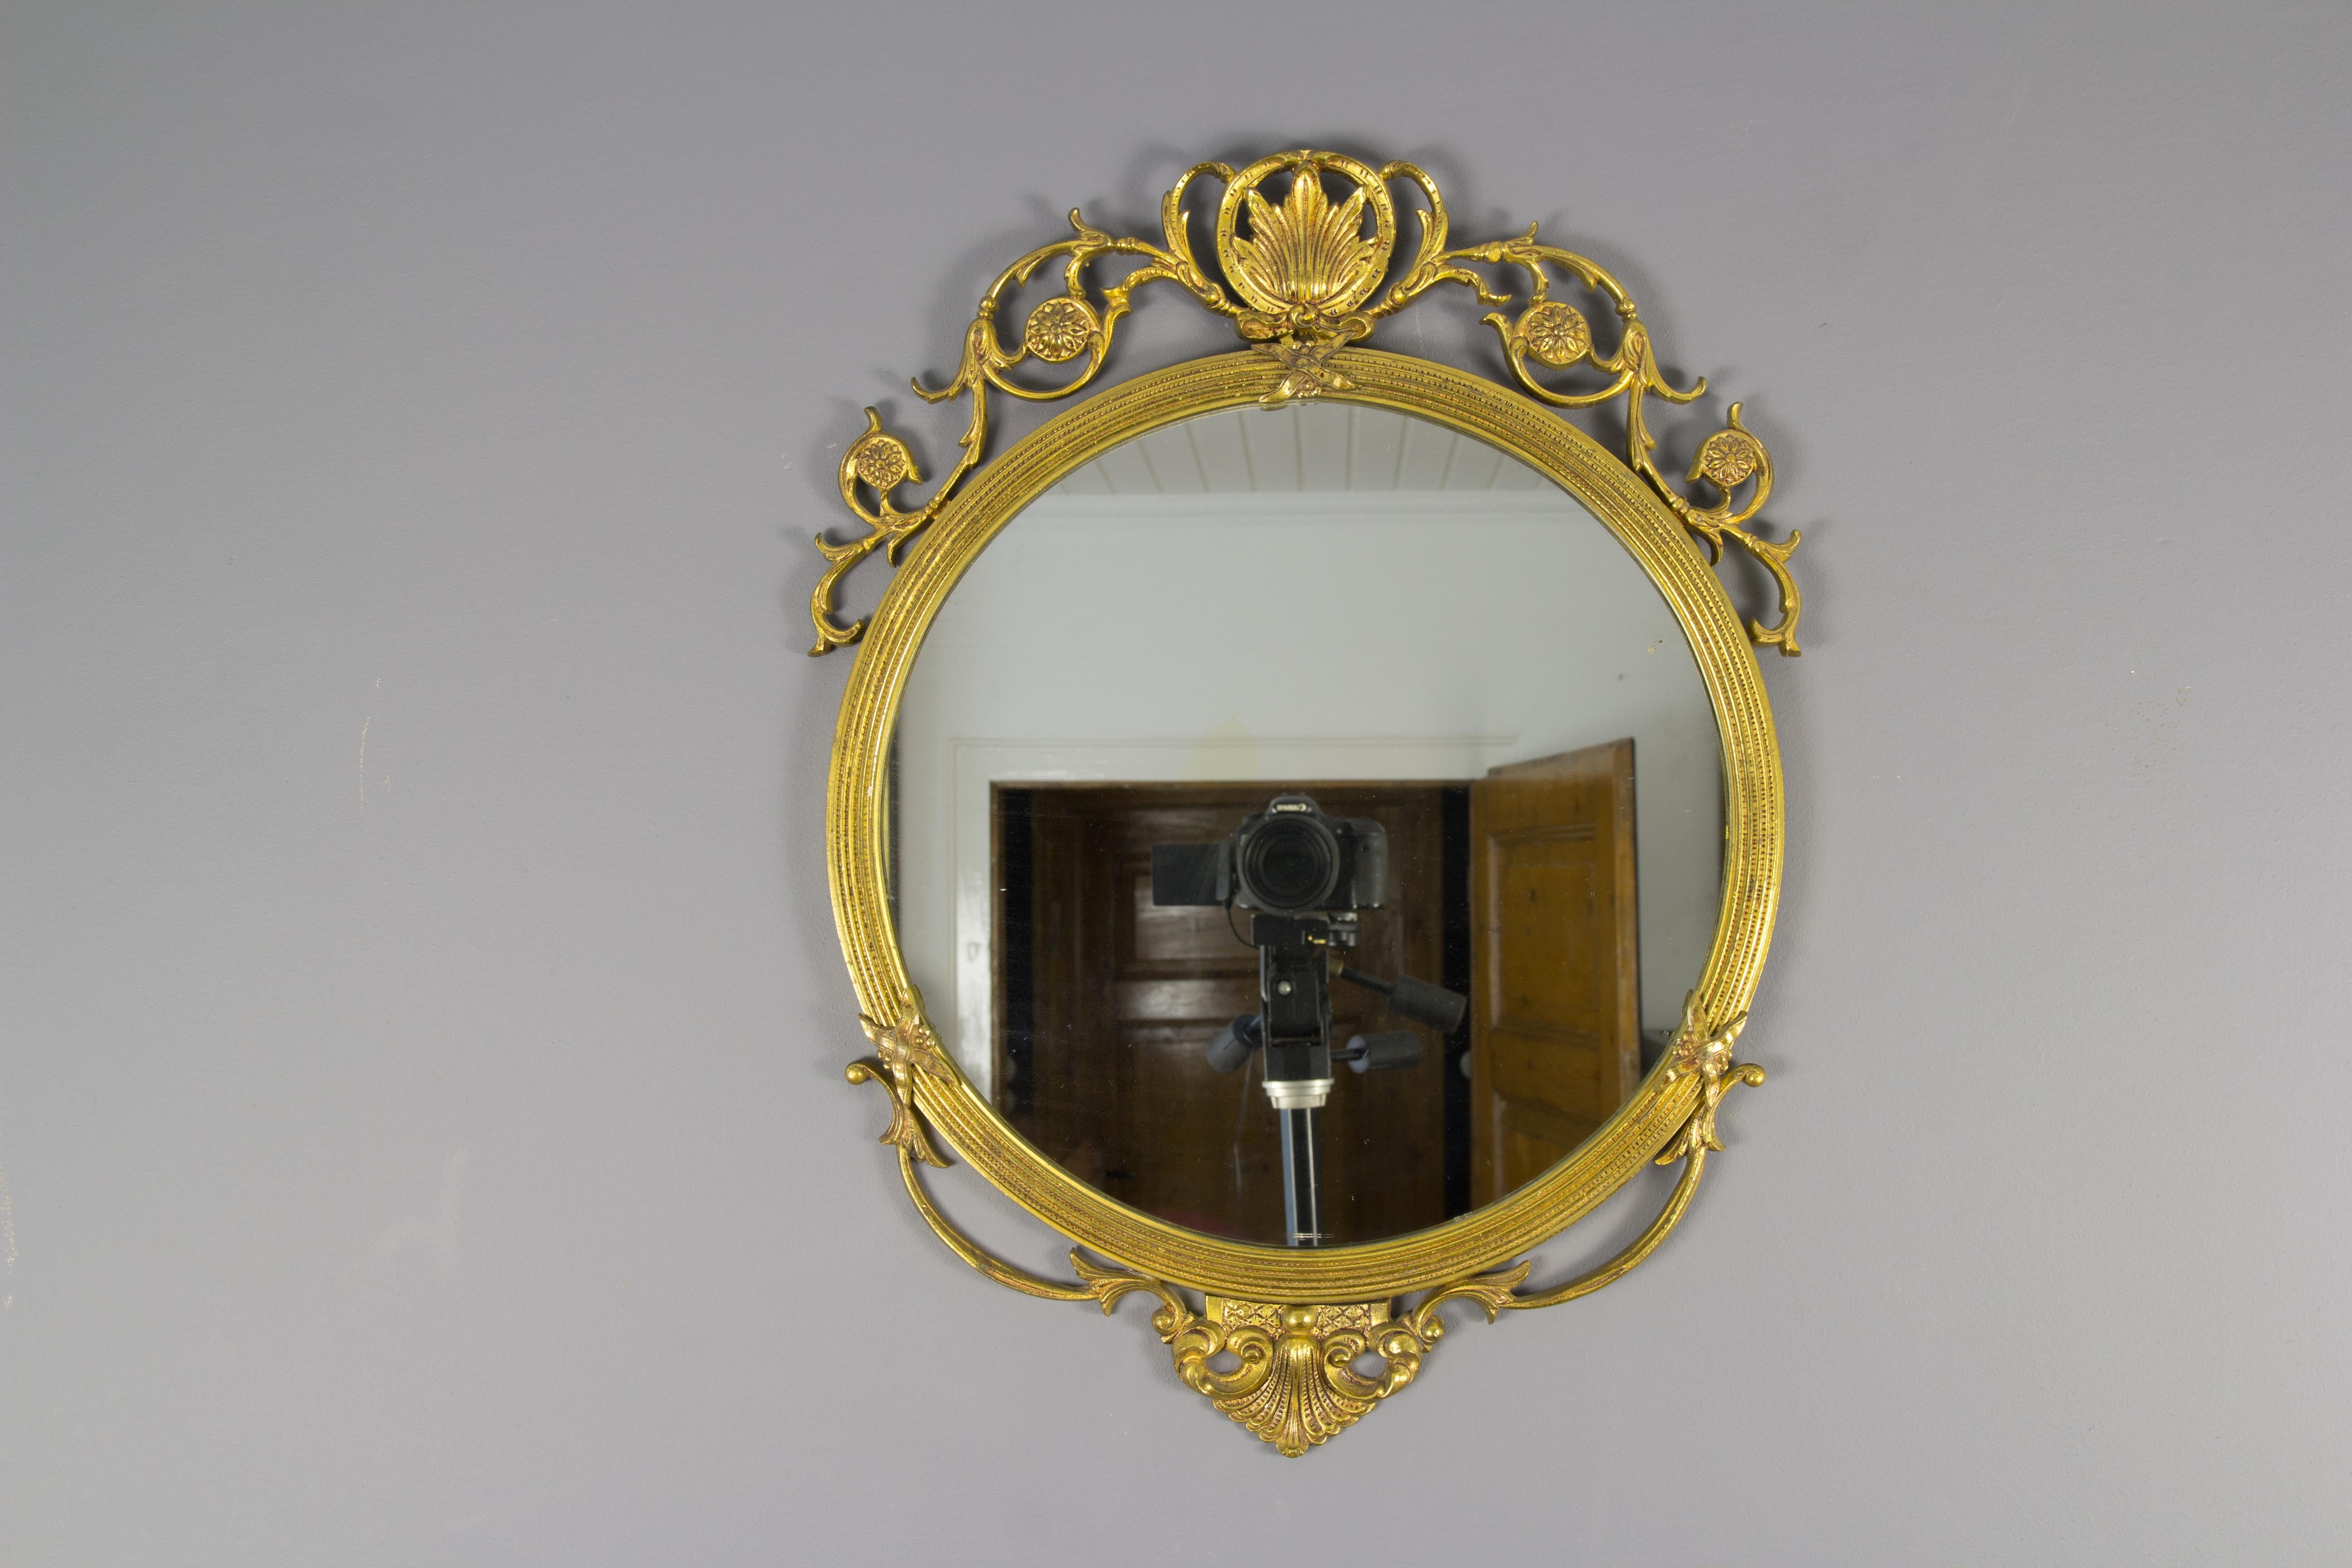 Neoclassical style round wall mirror, bronze frame decorated with rosettes, scrolls and foliate details. France, circa 1930s.
Dimensions: height: 58 cm / 22.83 in; width: 45 cm / 17.71 in; depth: 2.5 cm / 0.98 in.
     